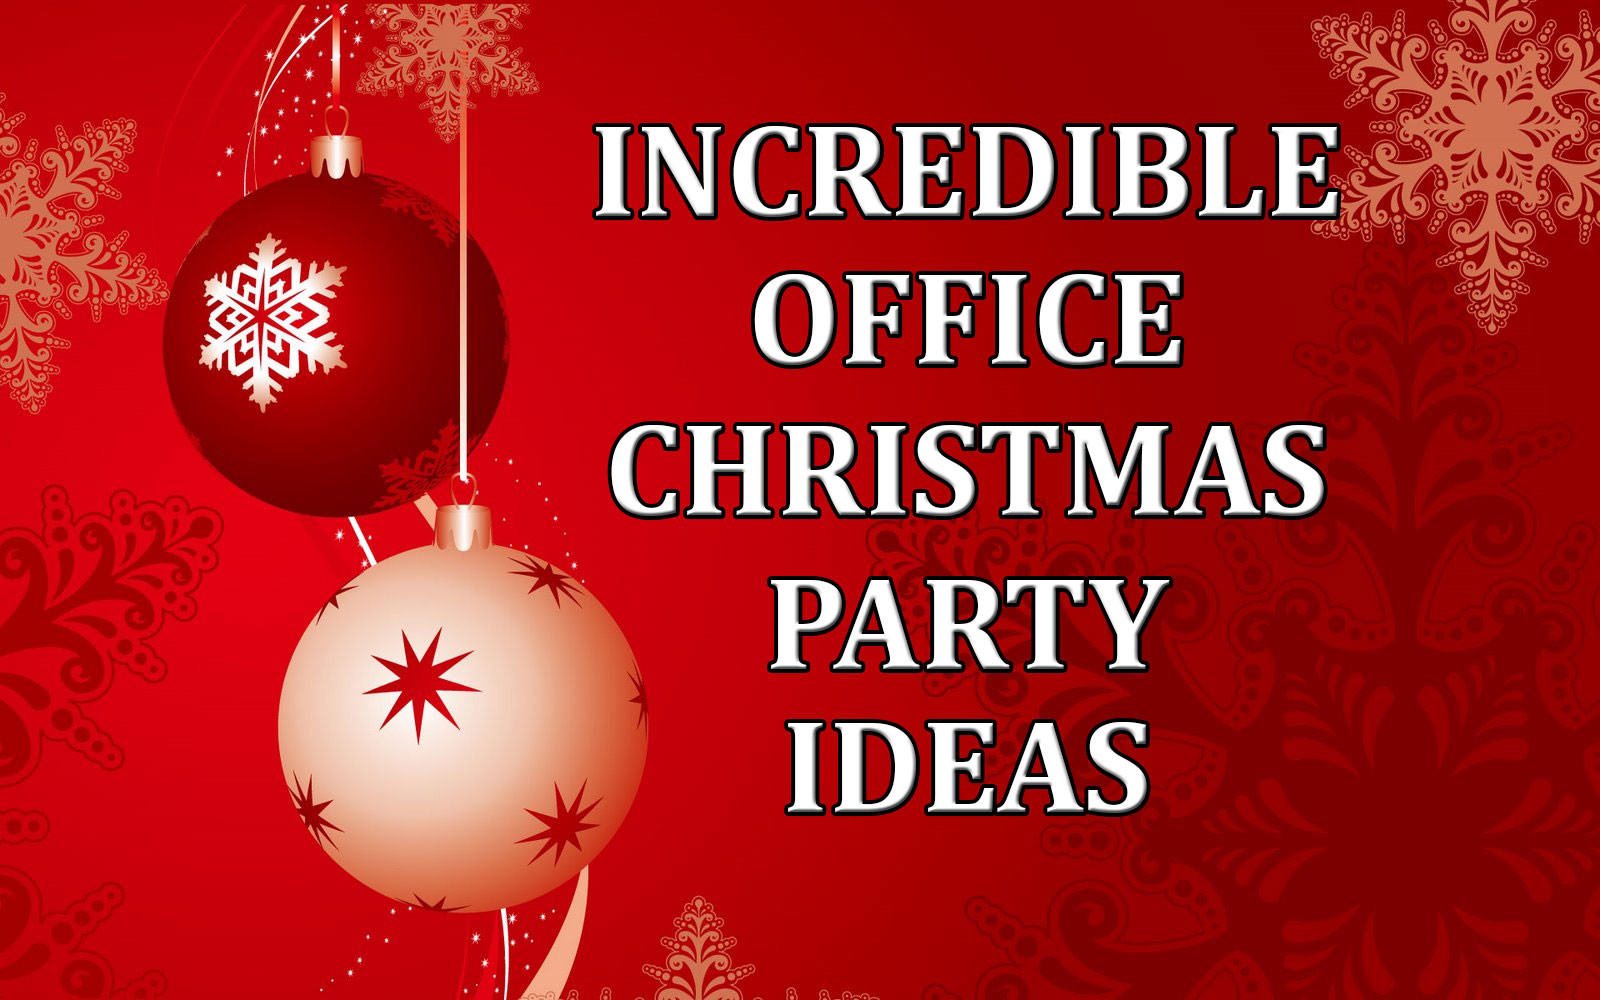 Small Office Christmas Party Ideas
 Incredible fice Christmas Party Ideas edy Ventriloquist